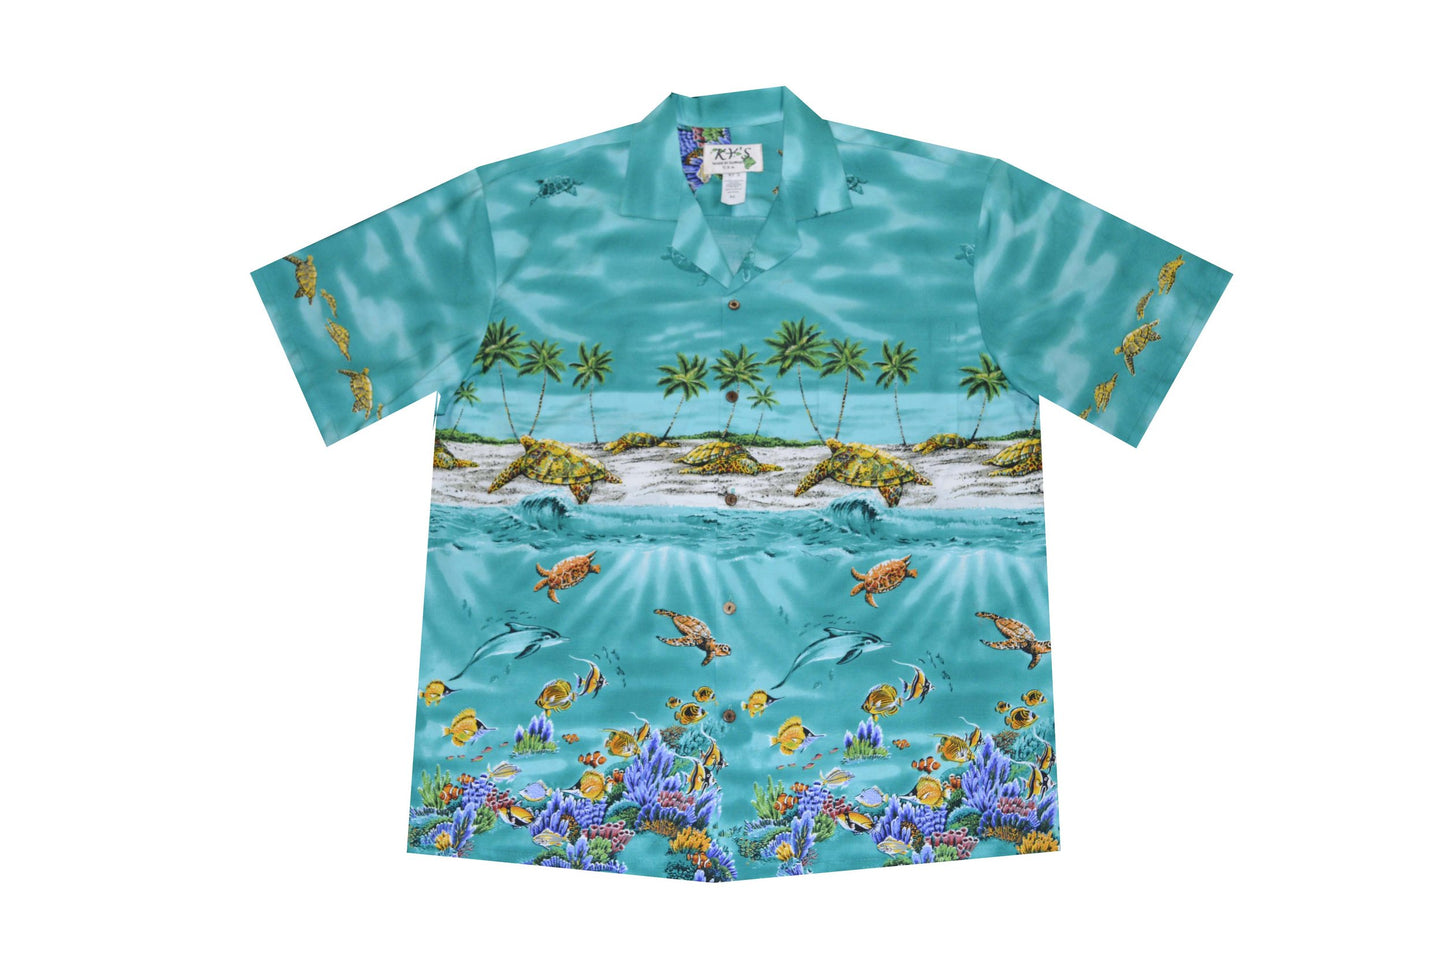 Turtle in the Ocean Chest-band Men's Cotton Aloha Shirt